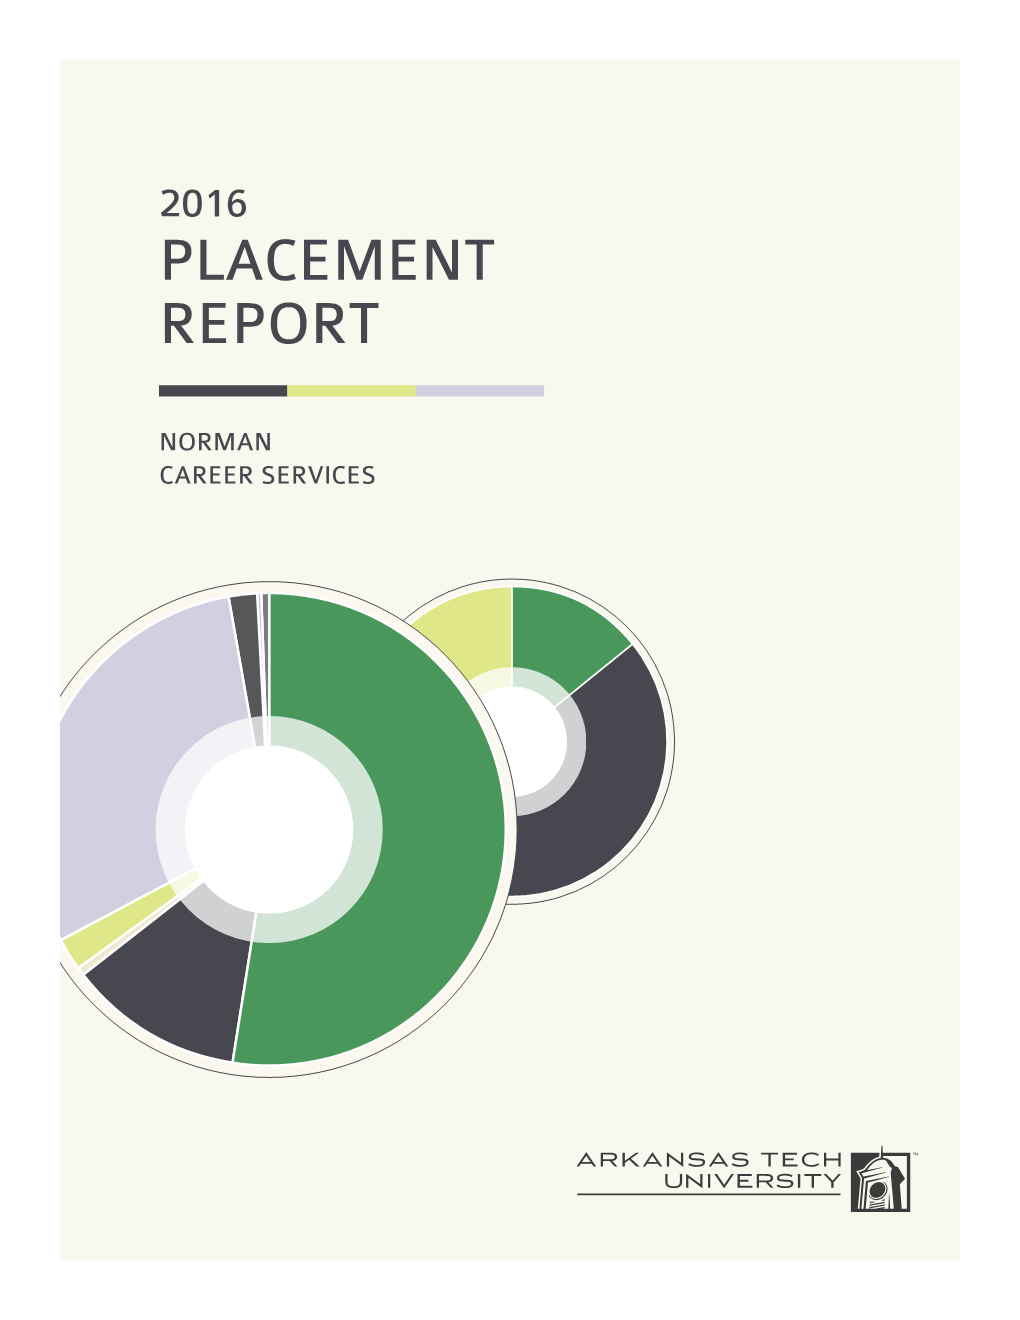 Placement Report